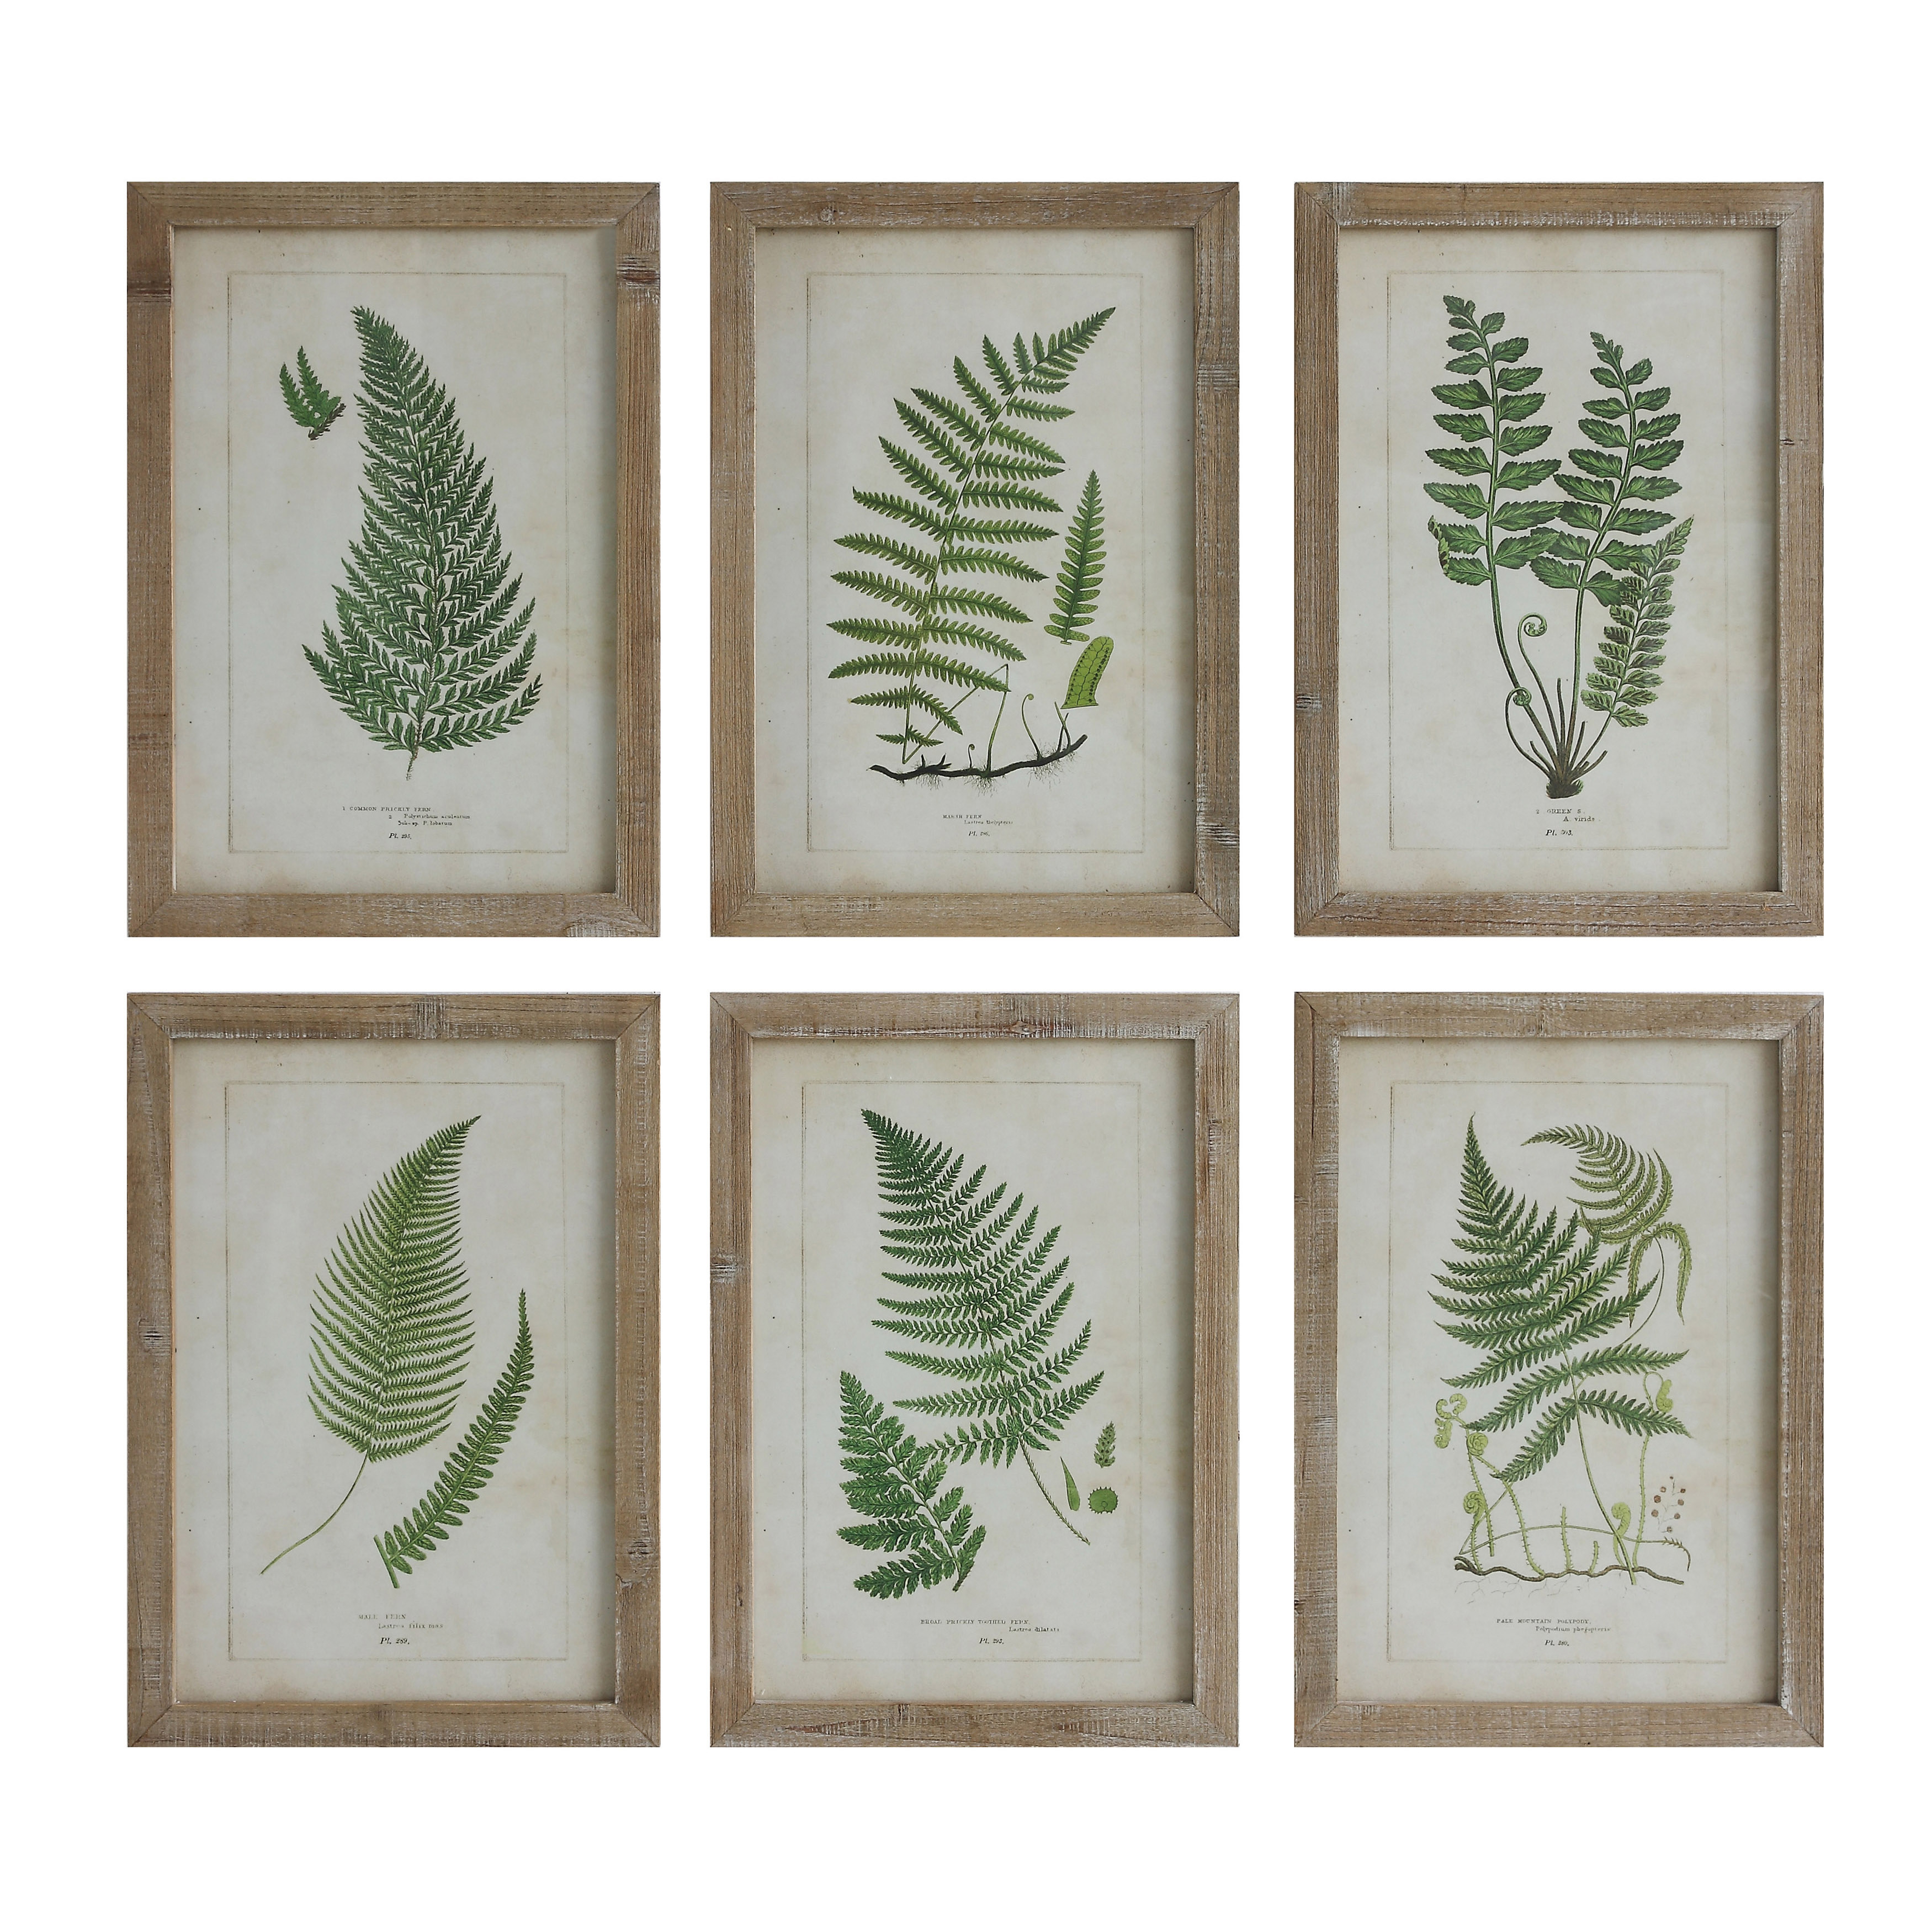 Wood Framed Wall Décor with Fern Fronds (Set of 6 Designs) - Creative Co-Op